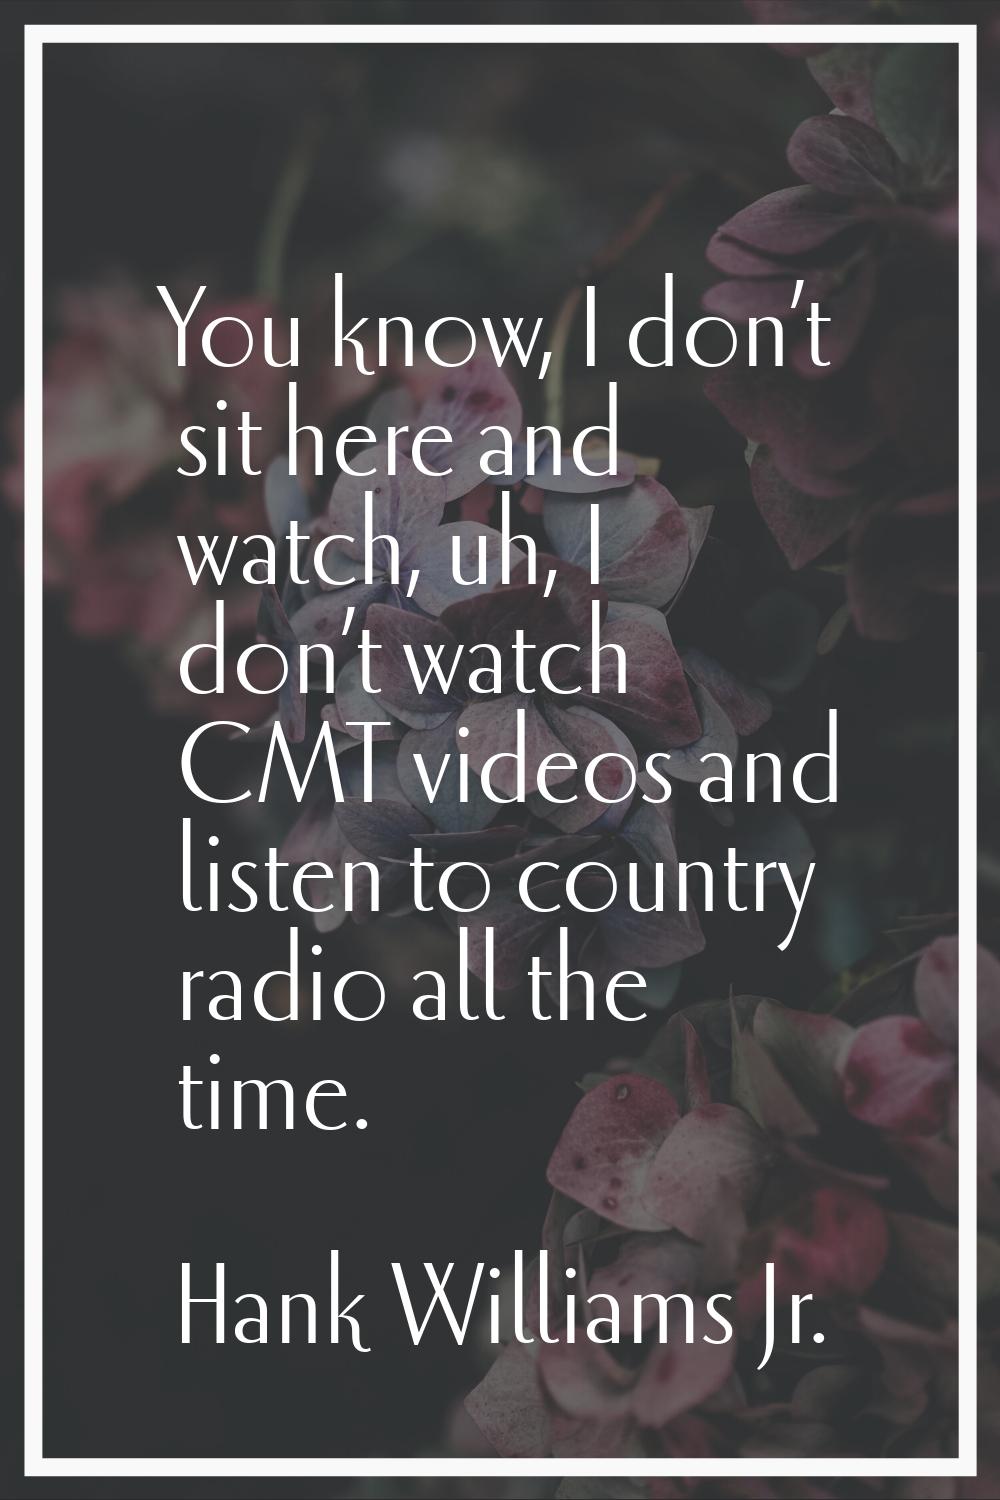 You know, I don’t sit here and watch, uh, I don’t watch CMT videos and listen to country radio all 